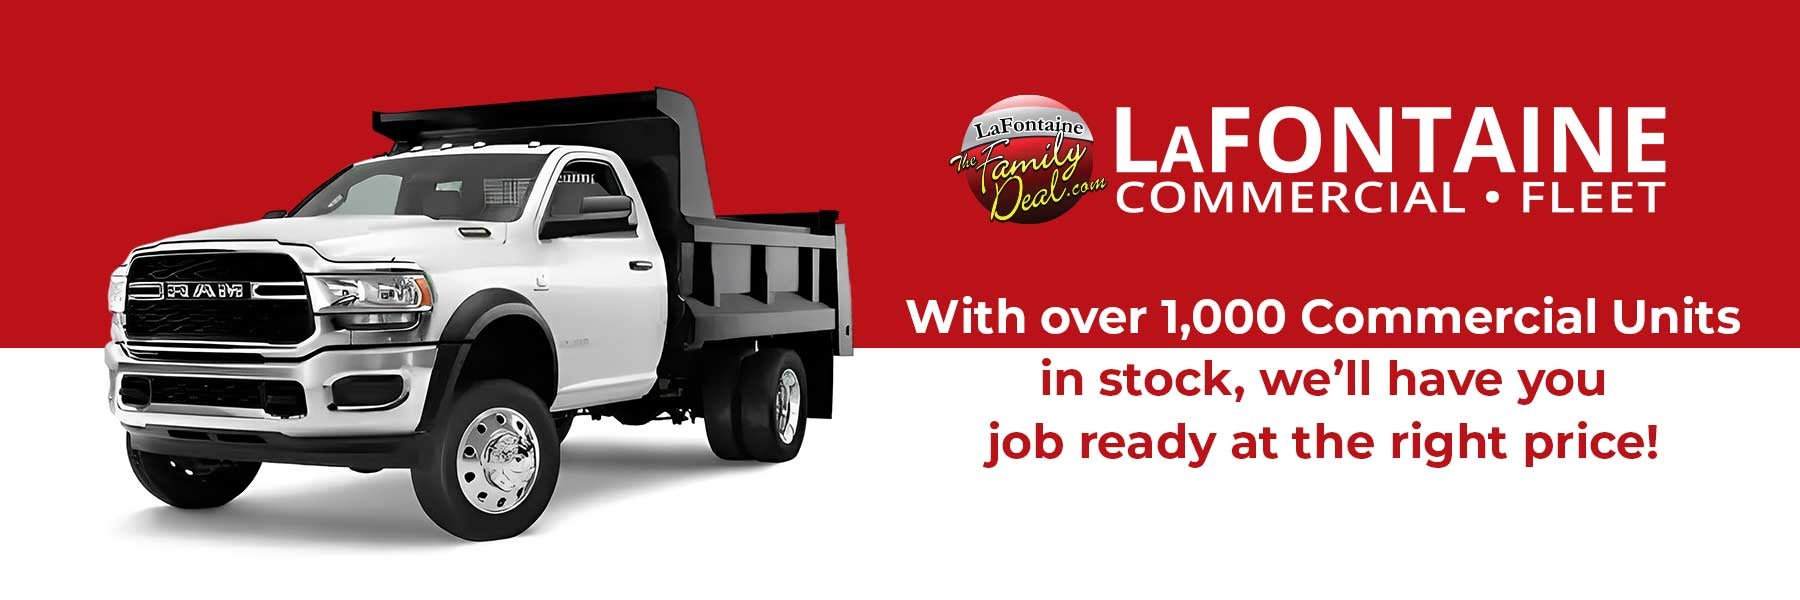 LaFontaine Chrysler Dodge Jeep RAM Walled Lake Commercial Fleet